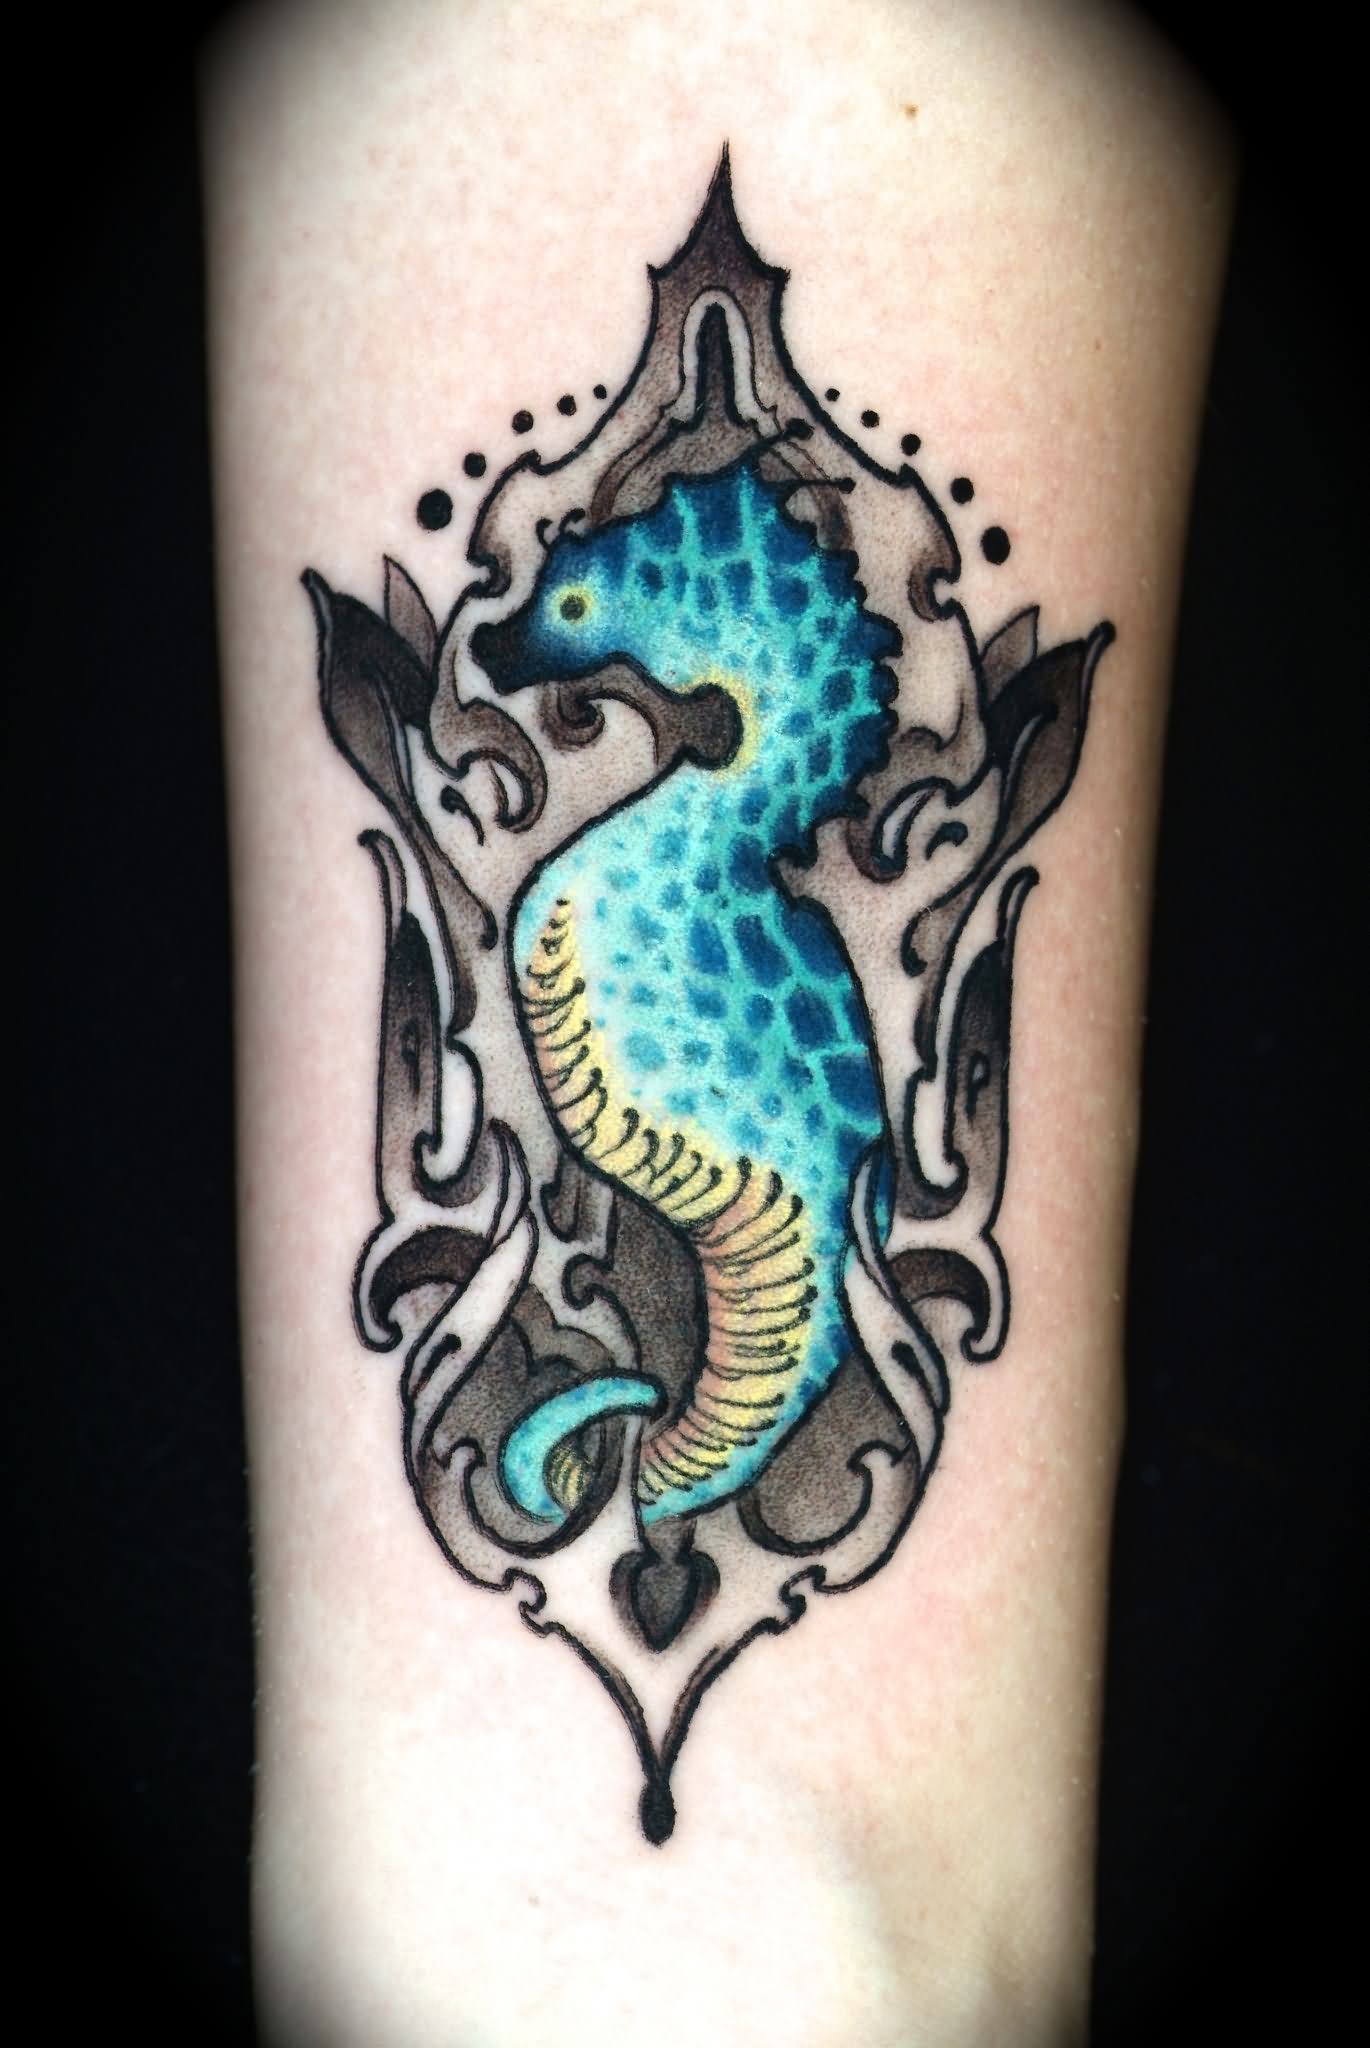 Cool Seahorse Tattoo On Forearm By Ben Merrell